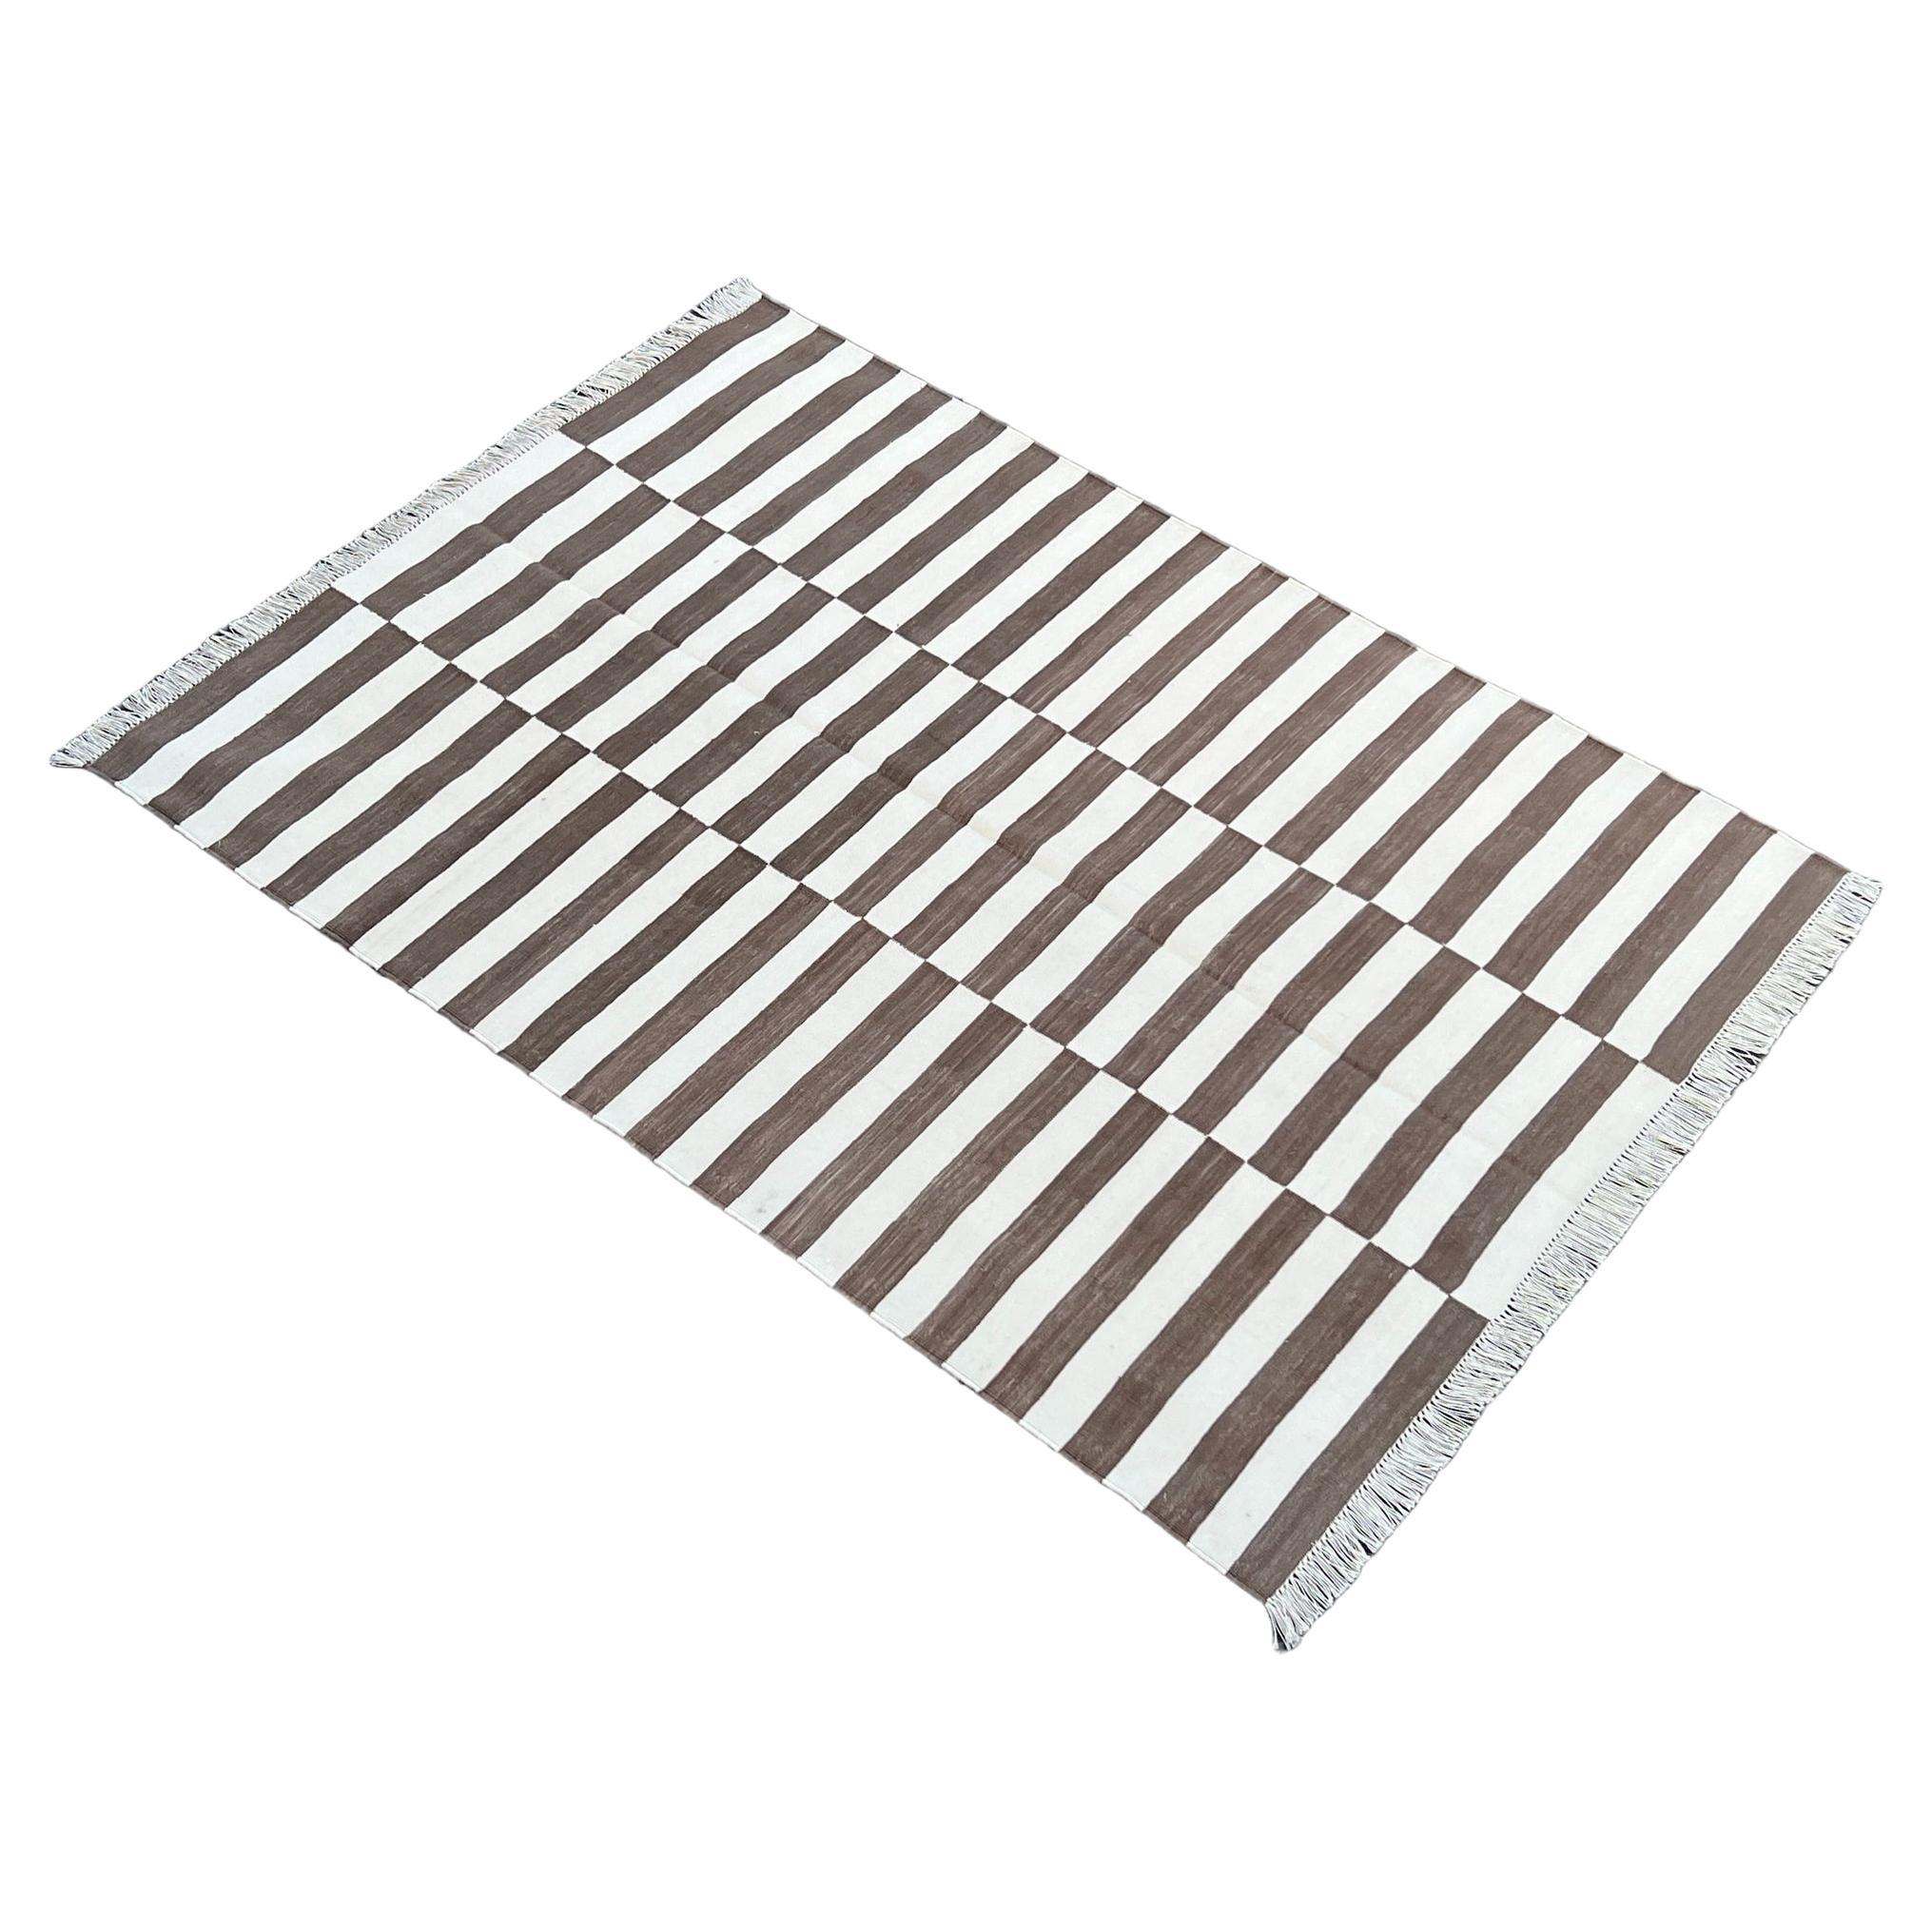 Handmade Cotton Area Flat Weave Rug, 4x6 Brown And White Striped Indian Dhurrie For Sale